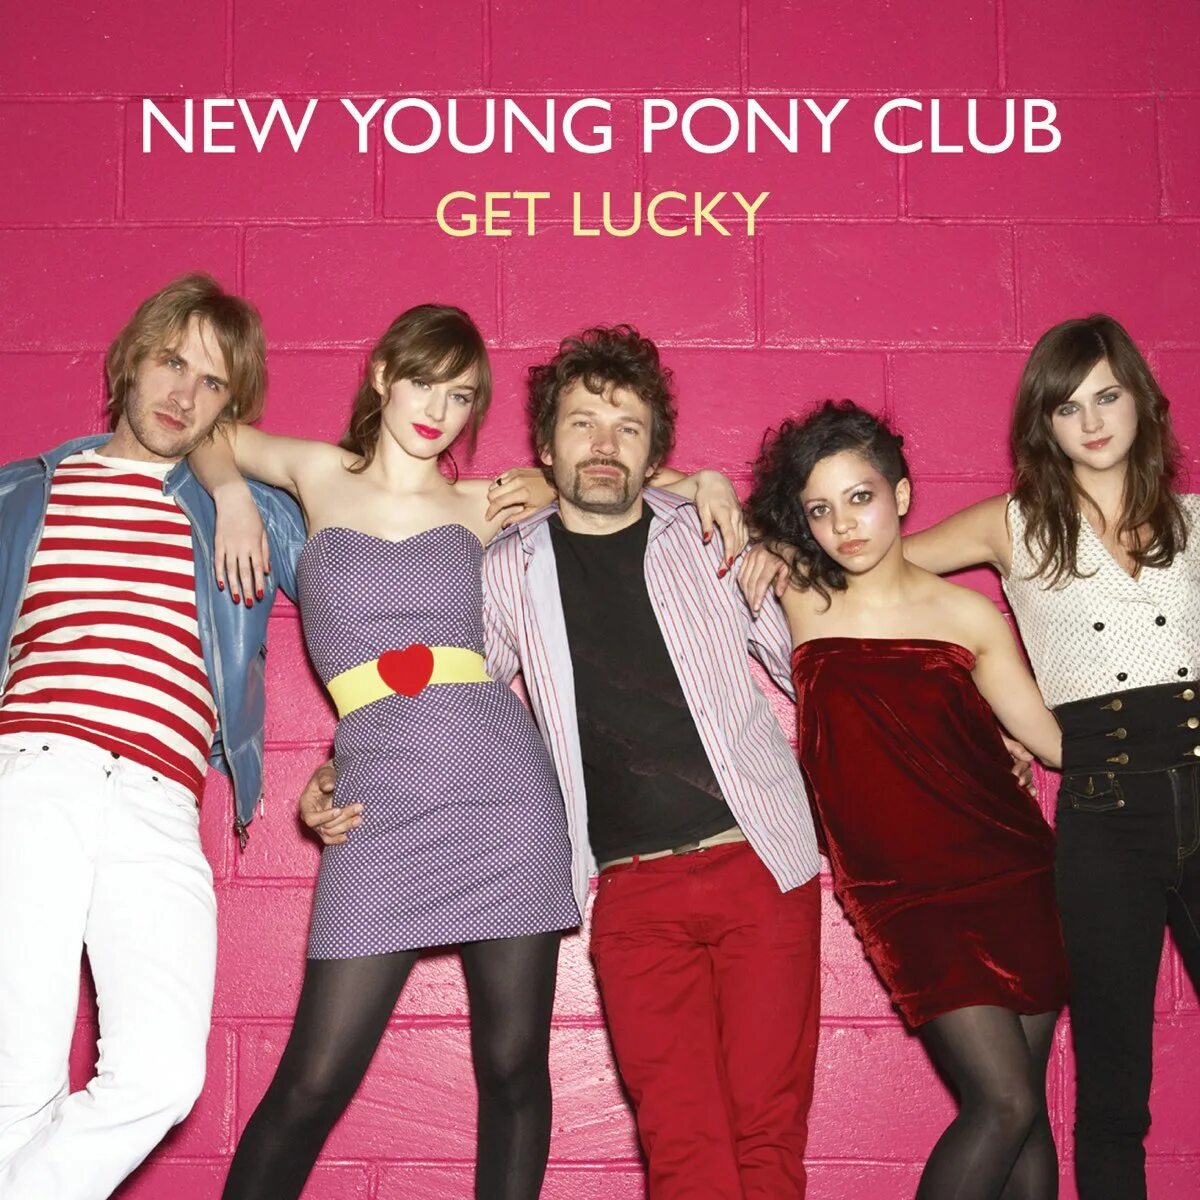 New Rave. Нью рейверы. Get Lucky New young Pony Club. New young бренд. Daughter get lucky